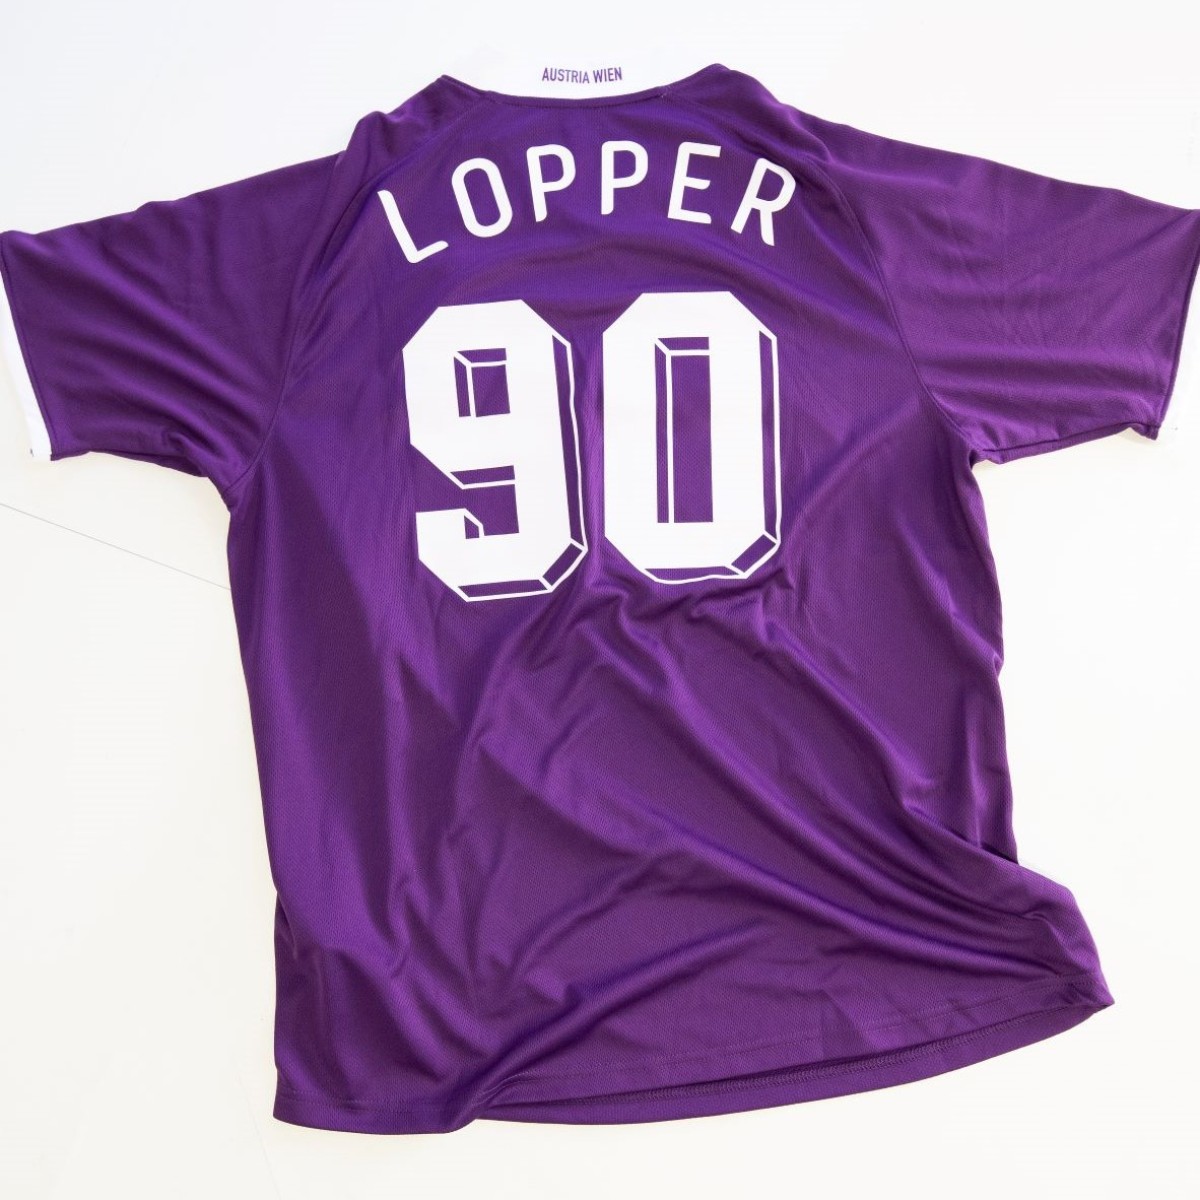 : Commemorative jersey for Norbert Lopper’s 90th birthday, 2009, textile, Collection Pierre Lopper